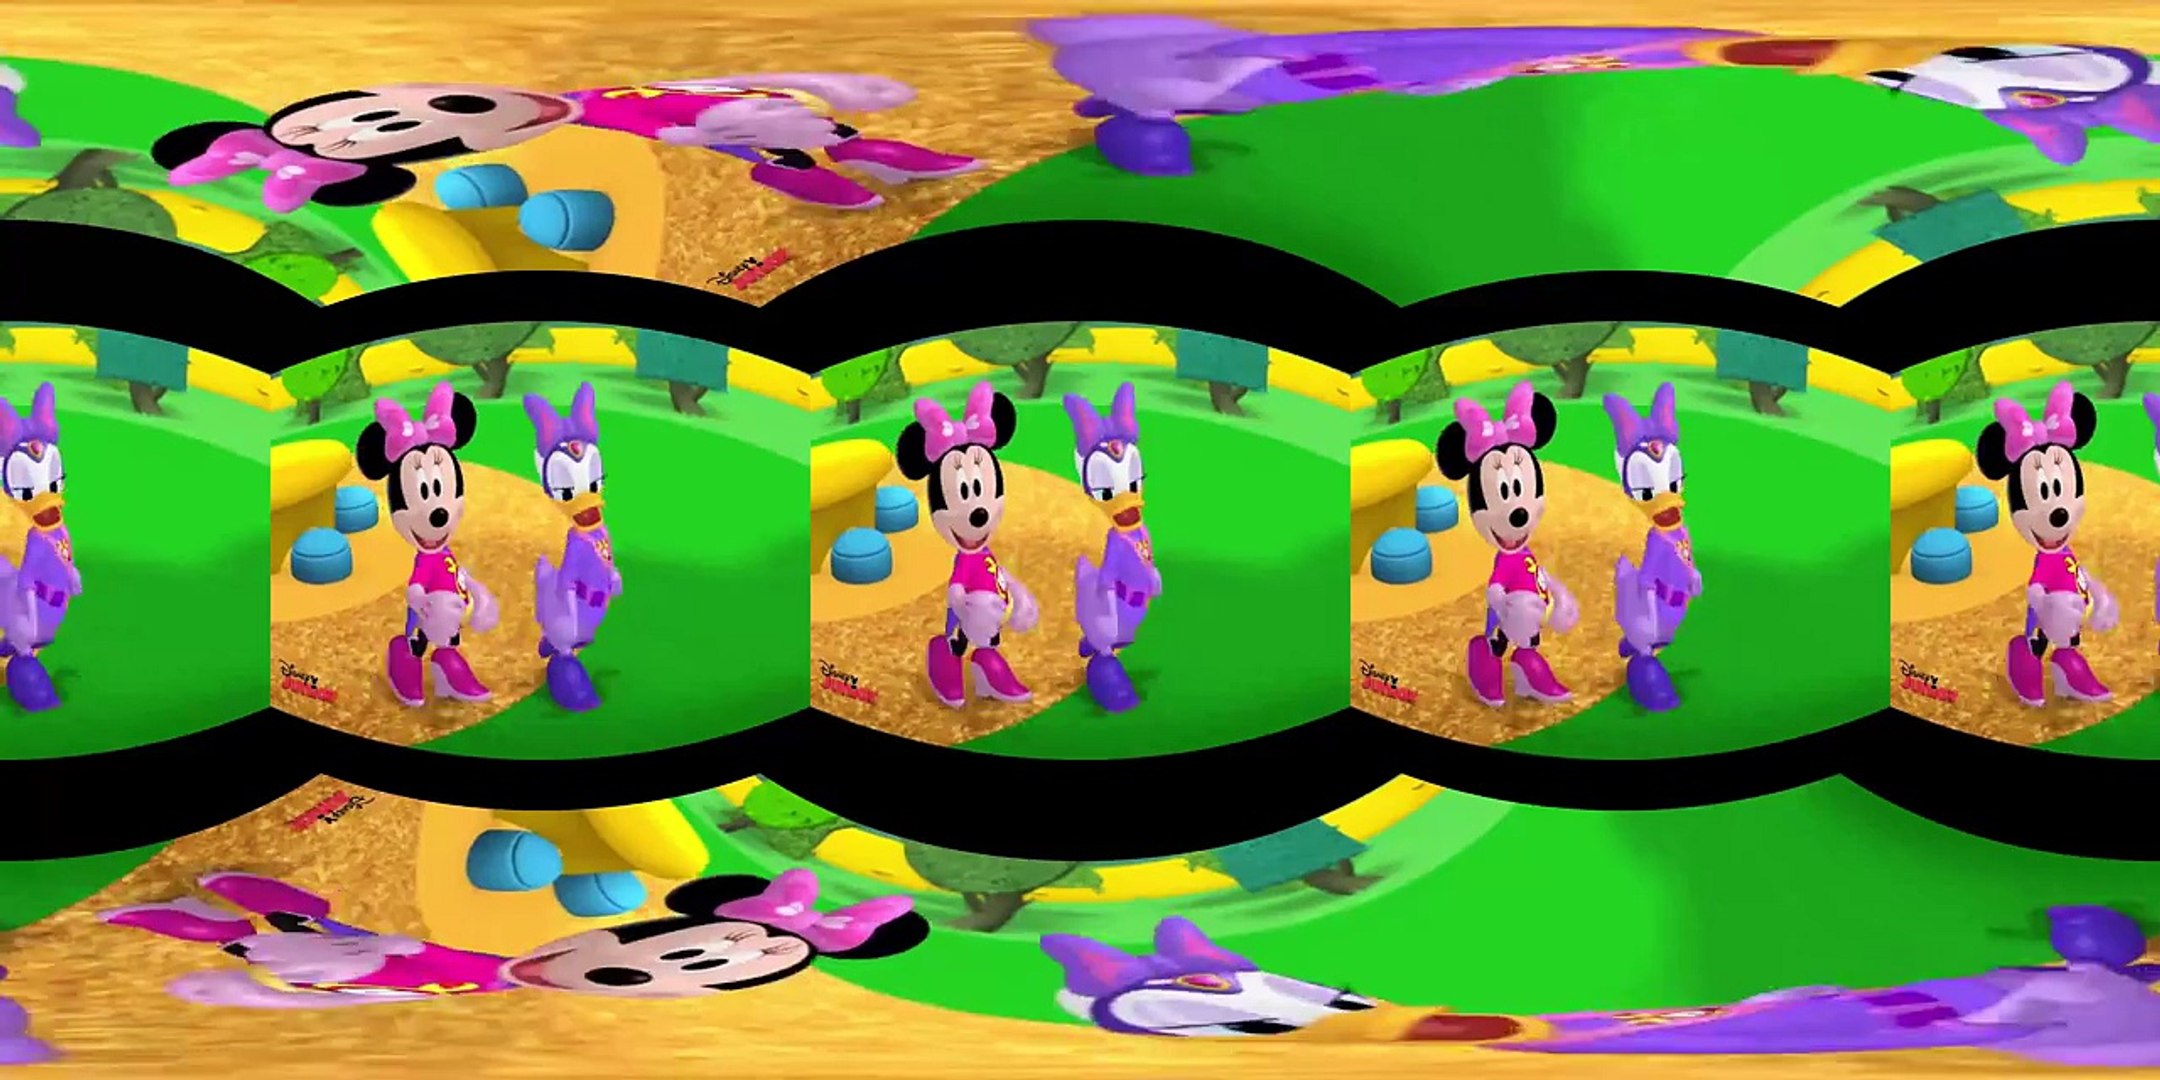 Mickey Mouse Clubhouse Theme Song HD + Lyrics - video Dailymotion